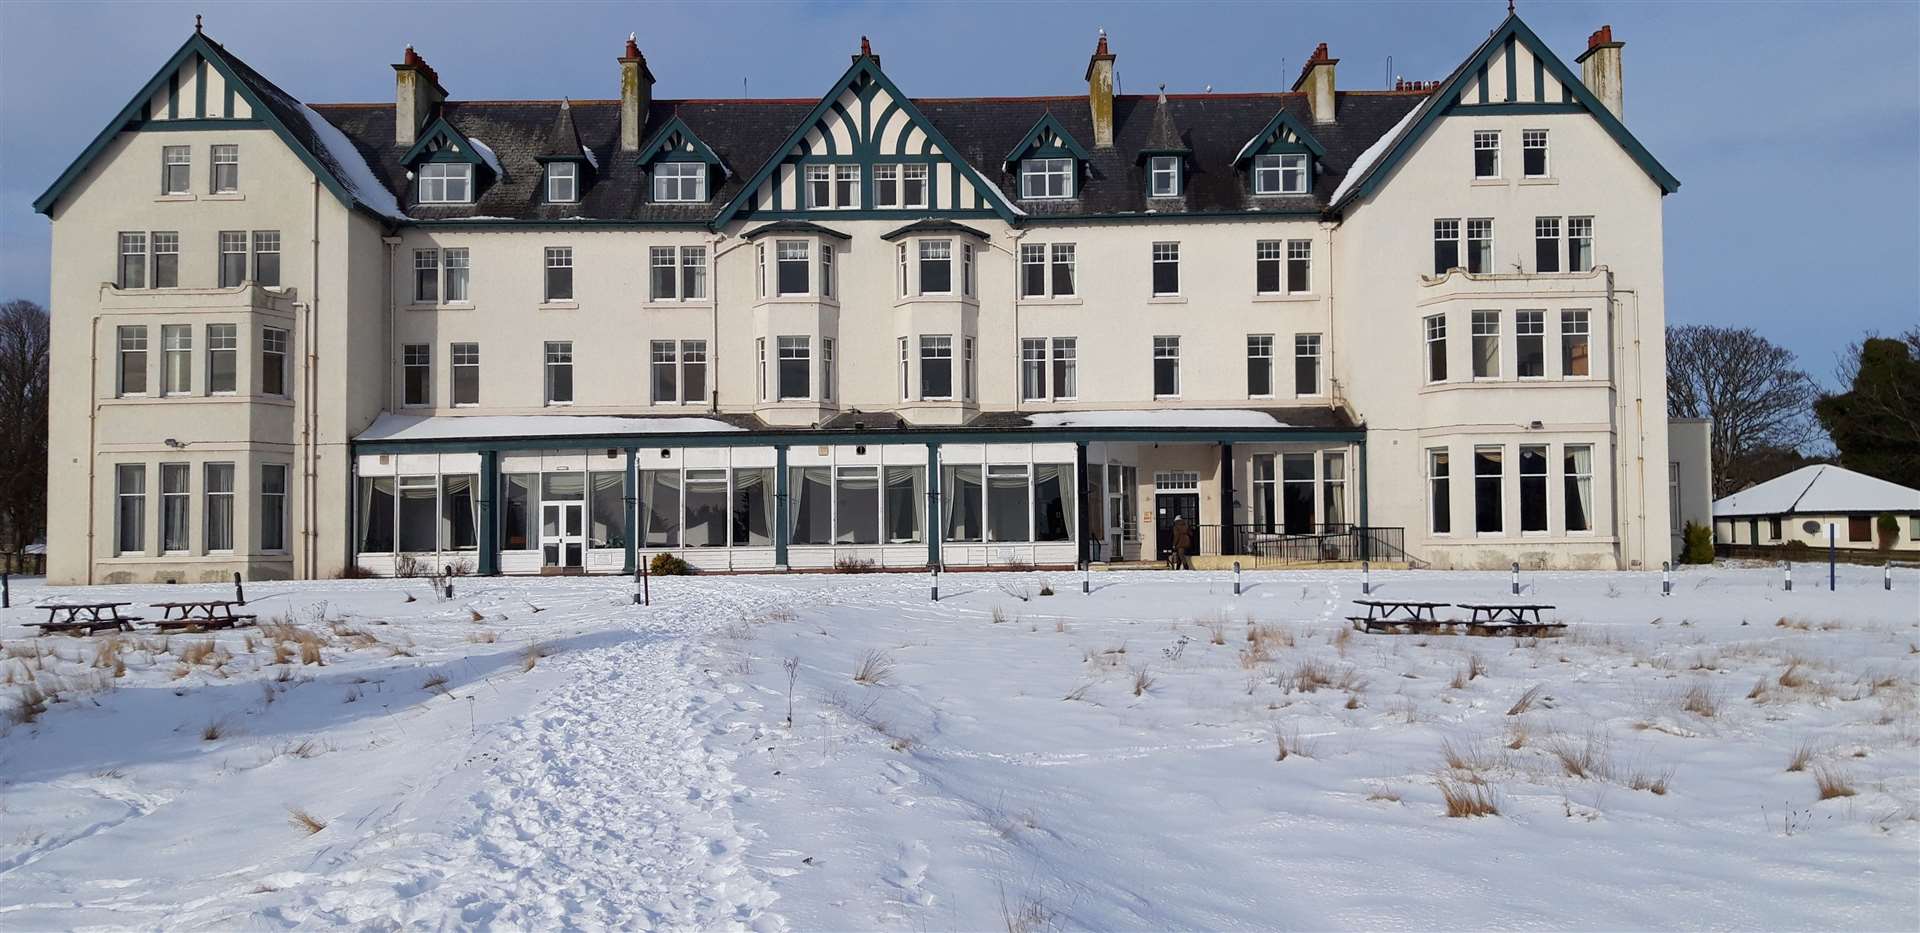 The Dornoch Hotel is now closed for extensive renovations by its new owners and is expected to reopen next summer. The hotel is the first in the Highlands to become part of Marine & Lawns Hotels and Resorts.